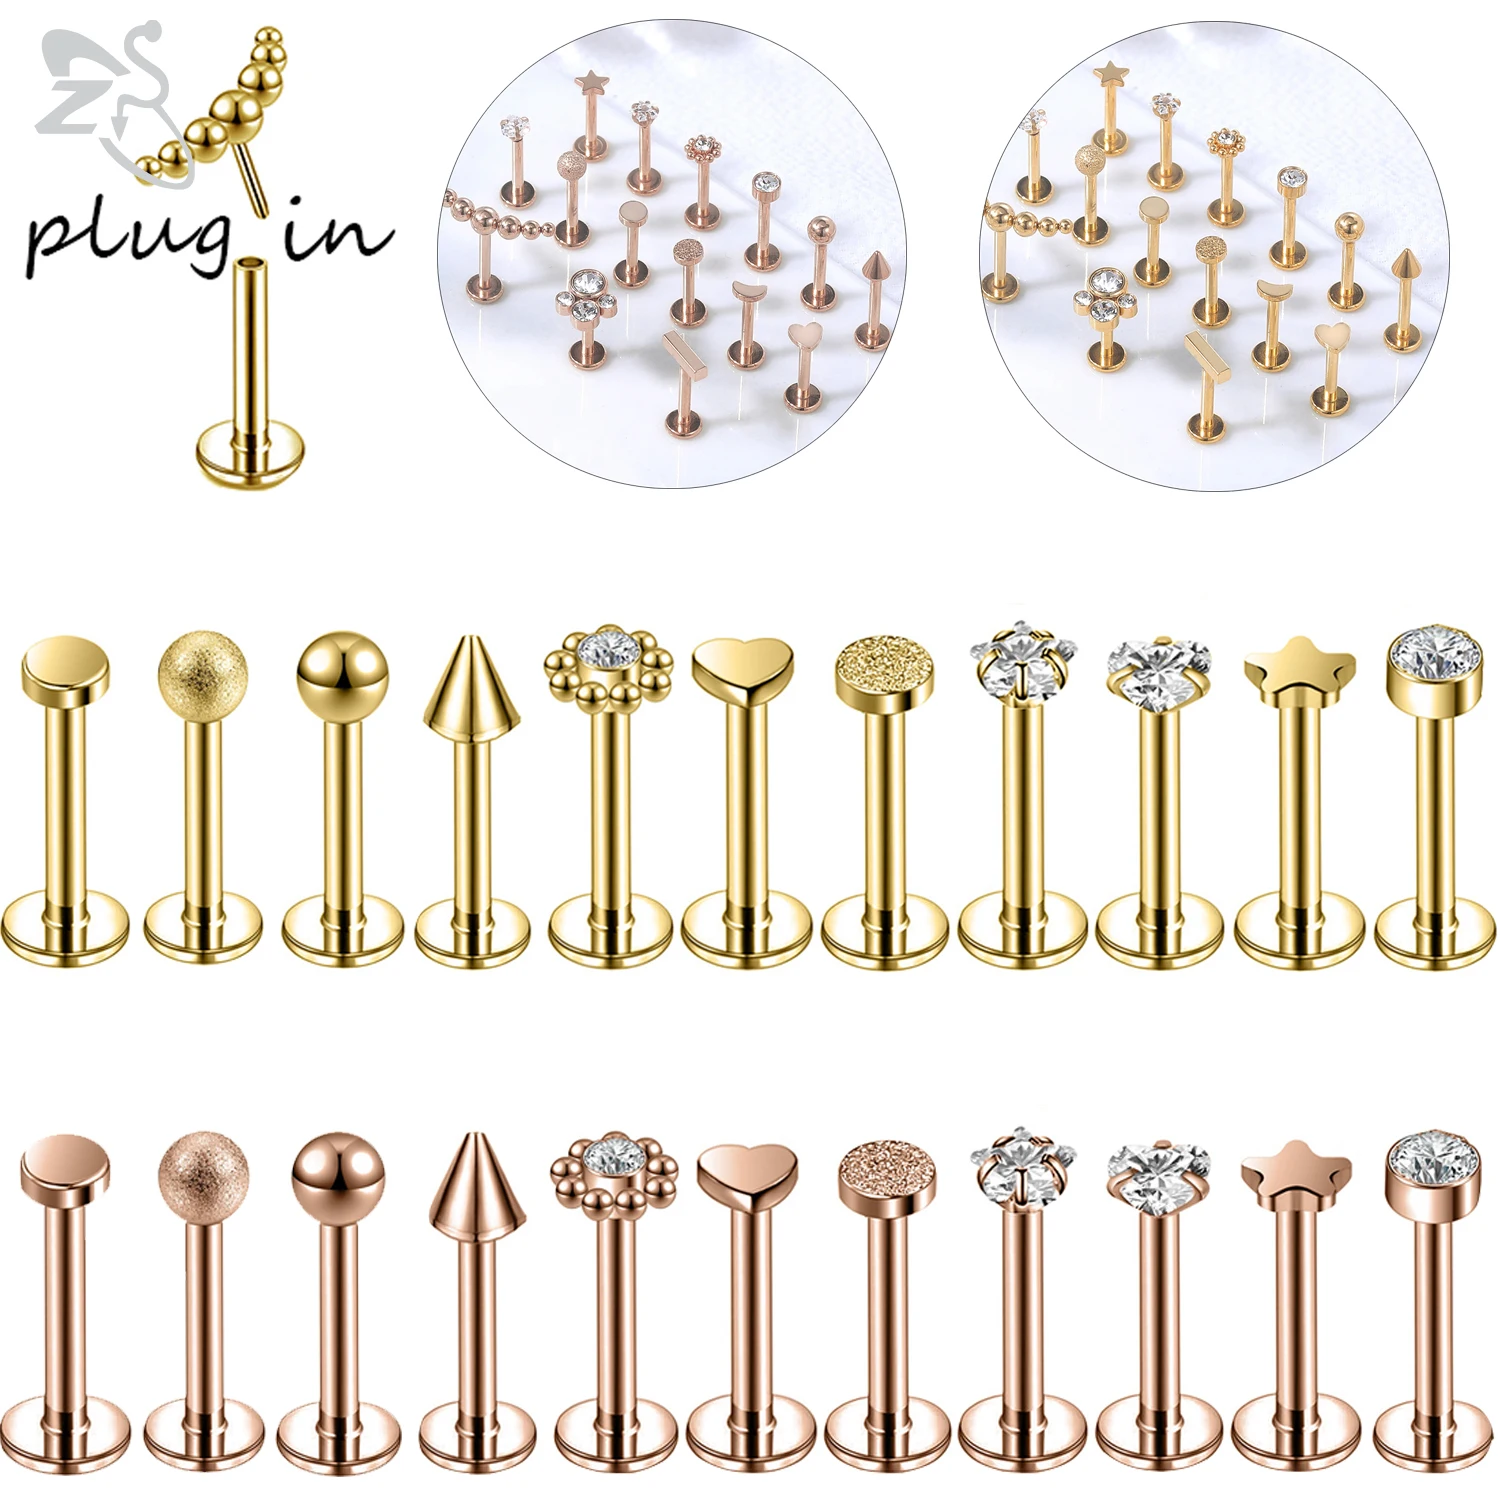 

ZS 1PC 16G 316L Stainless Steel Labret Piercing Plug in Style Lip Stud Crystal Star Moon Heart Ear Tragus Helix Conch Piercing